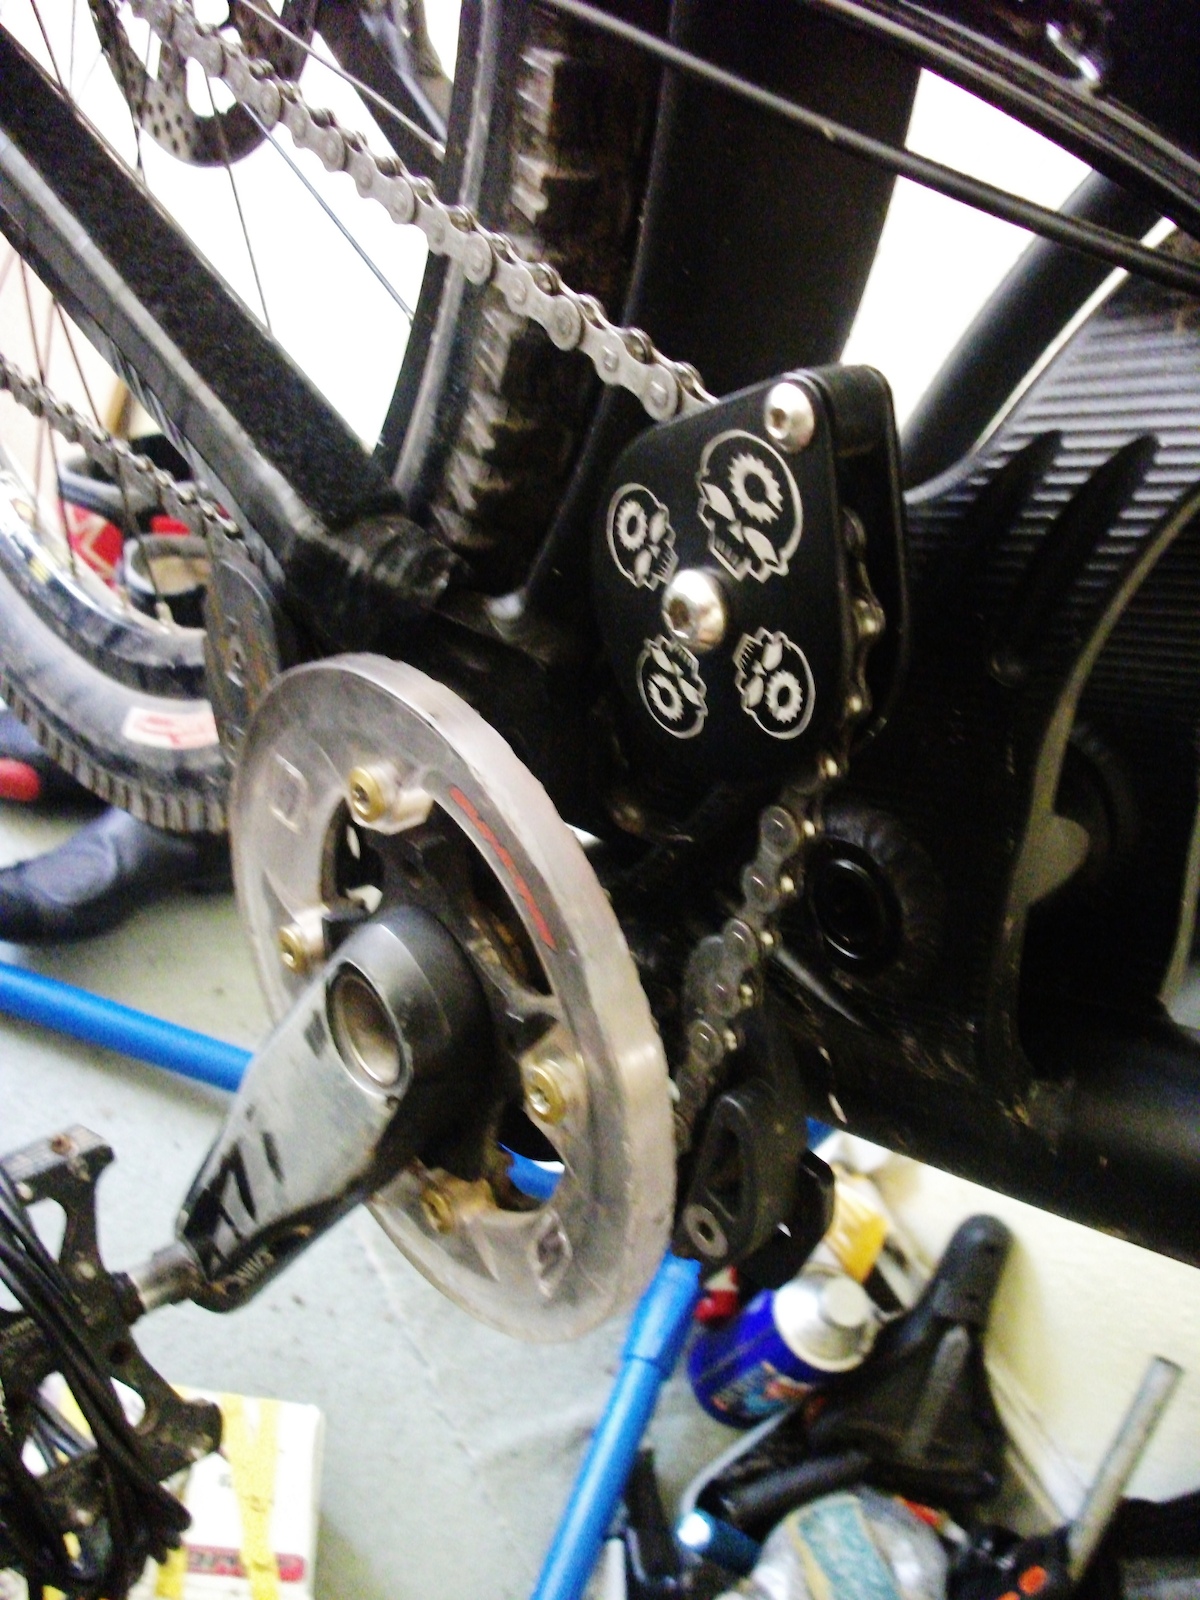 De decaled my cranks, totally forgot how worn they were, oh well. Super cool idler pulley system